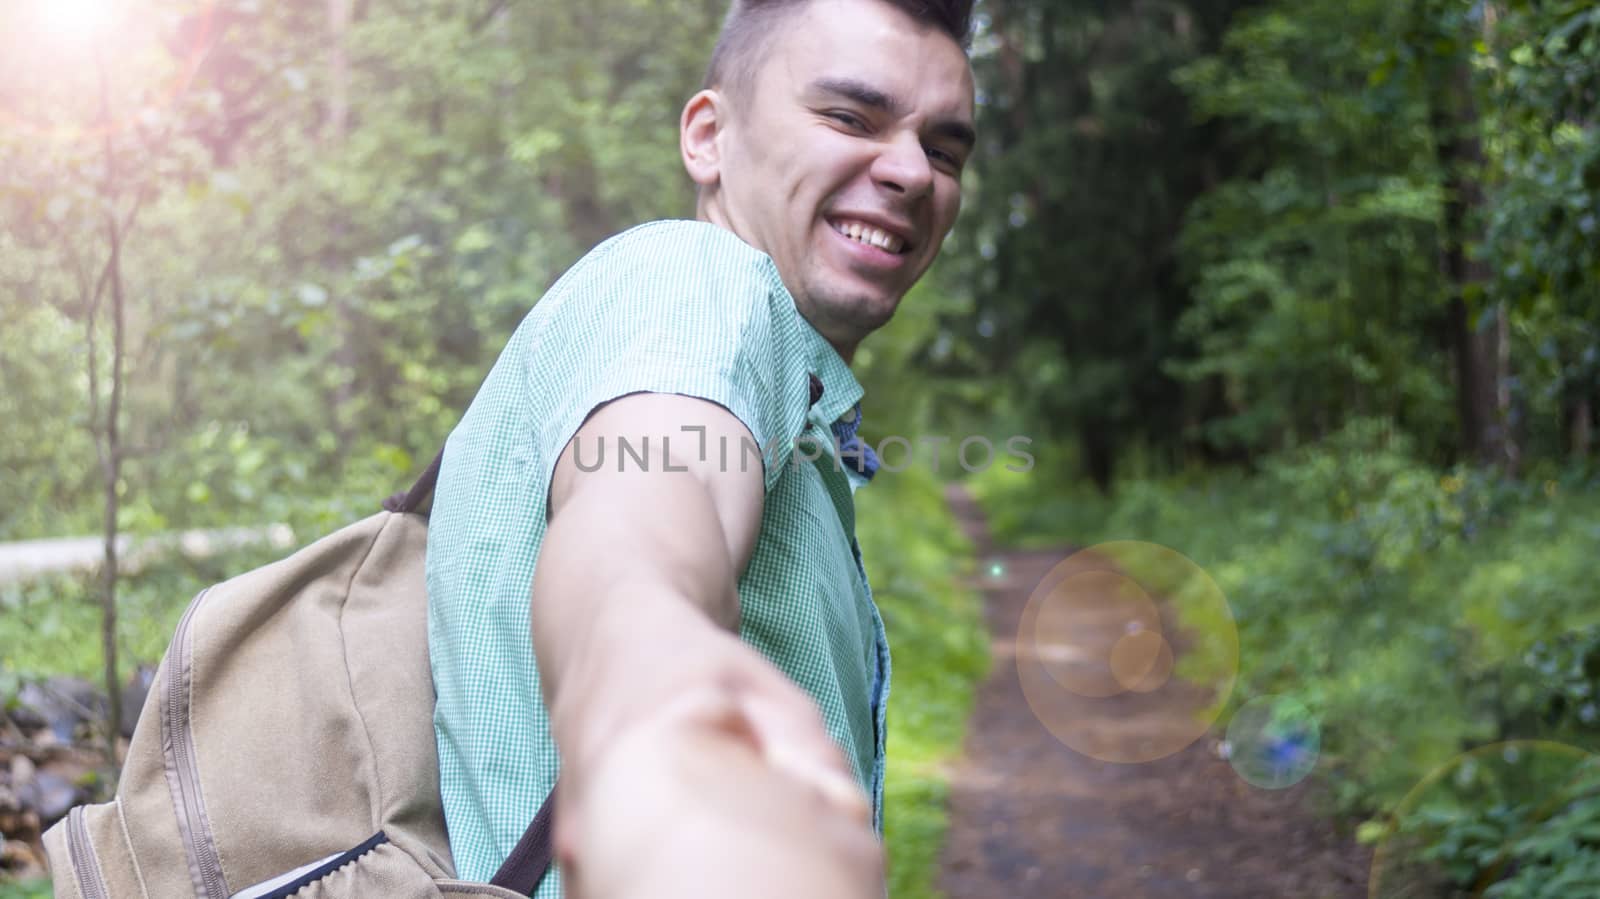 The young man pulls the girl's hand on the forest path